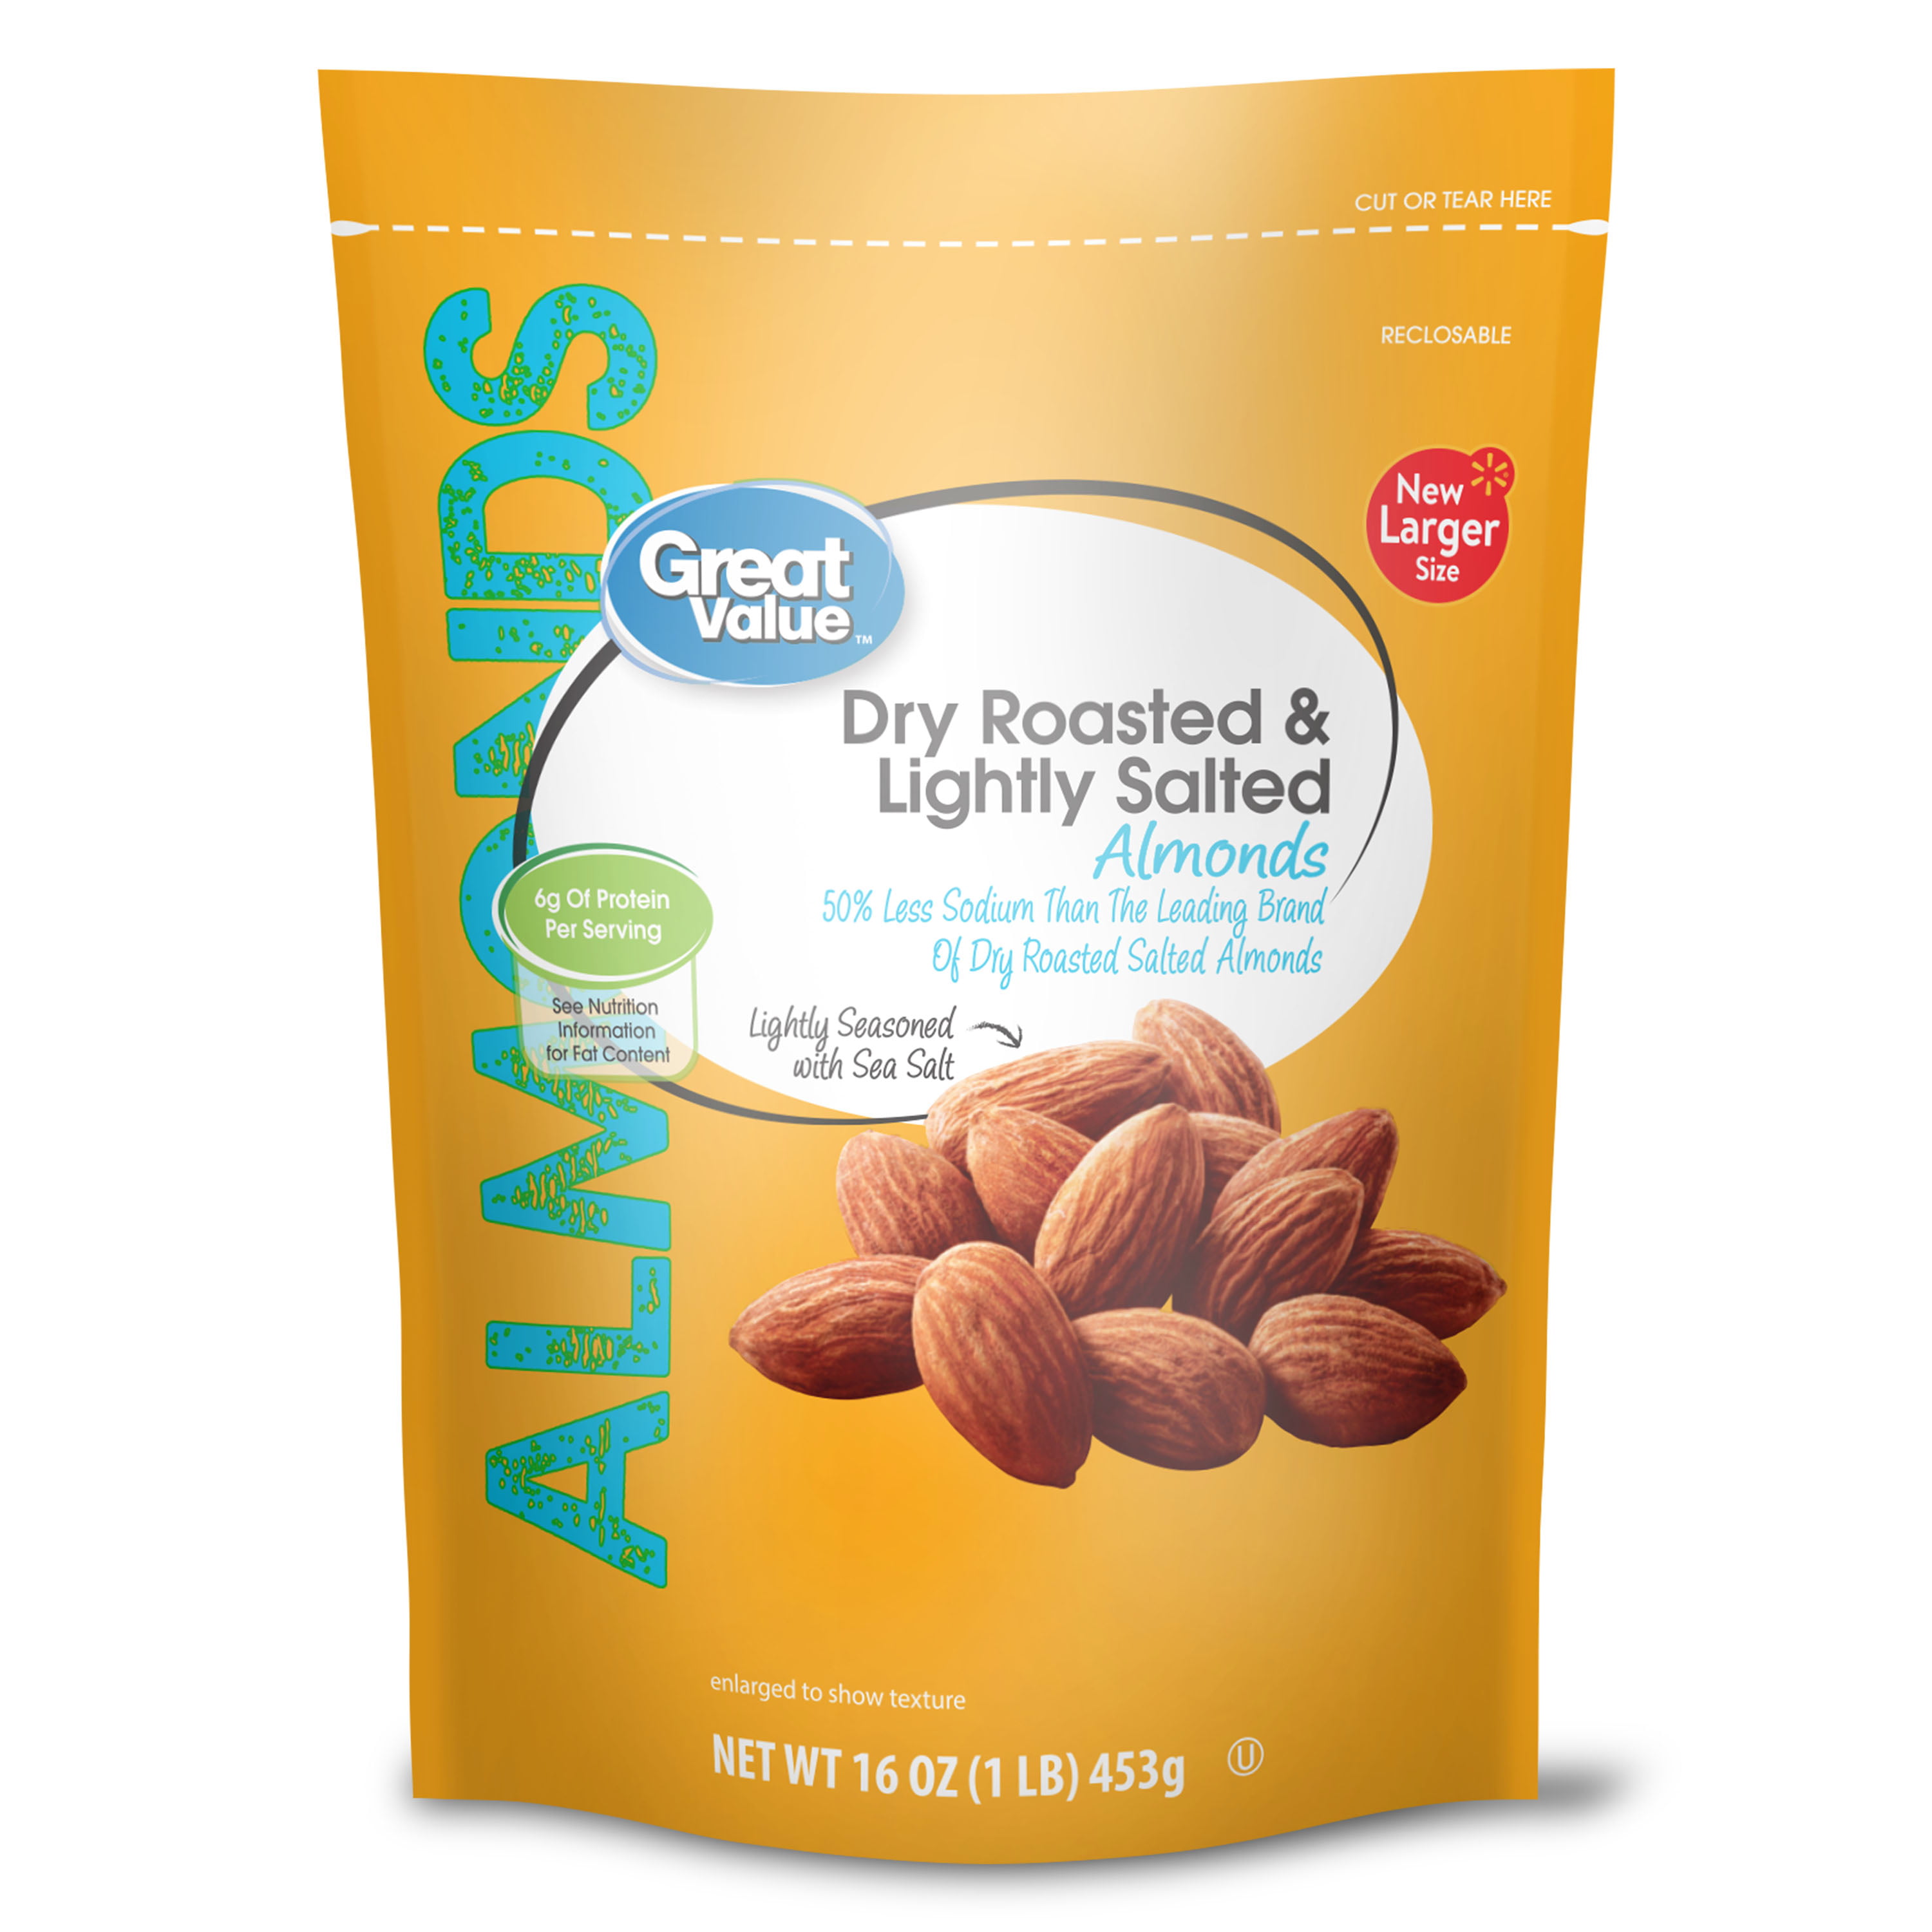 Great Value Dry Roasted & Lightly Salted Almonds, 16 Oz